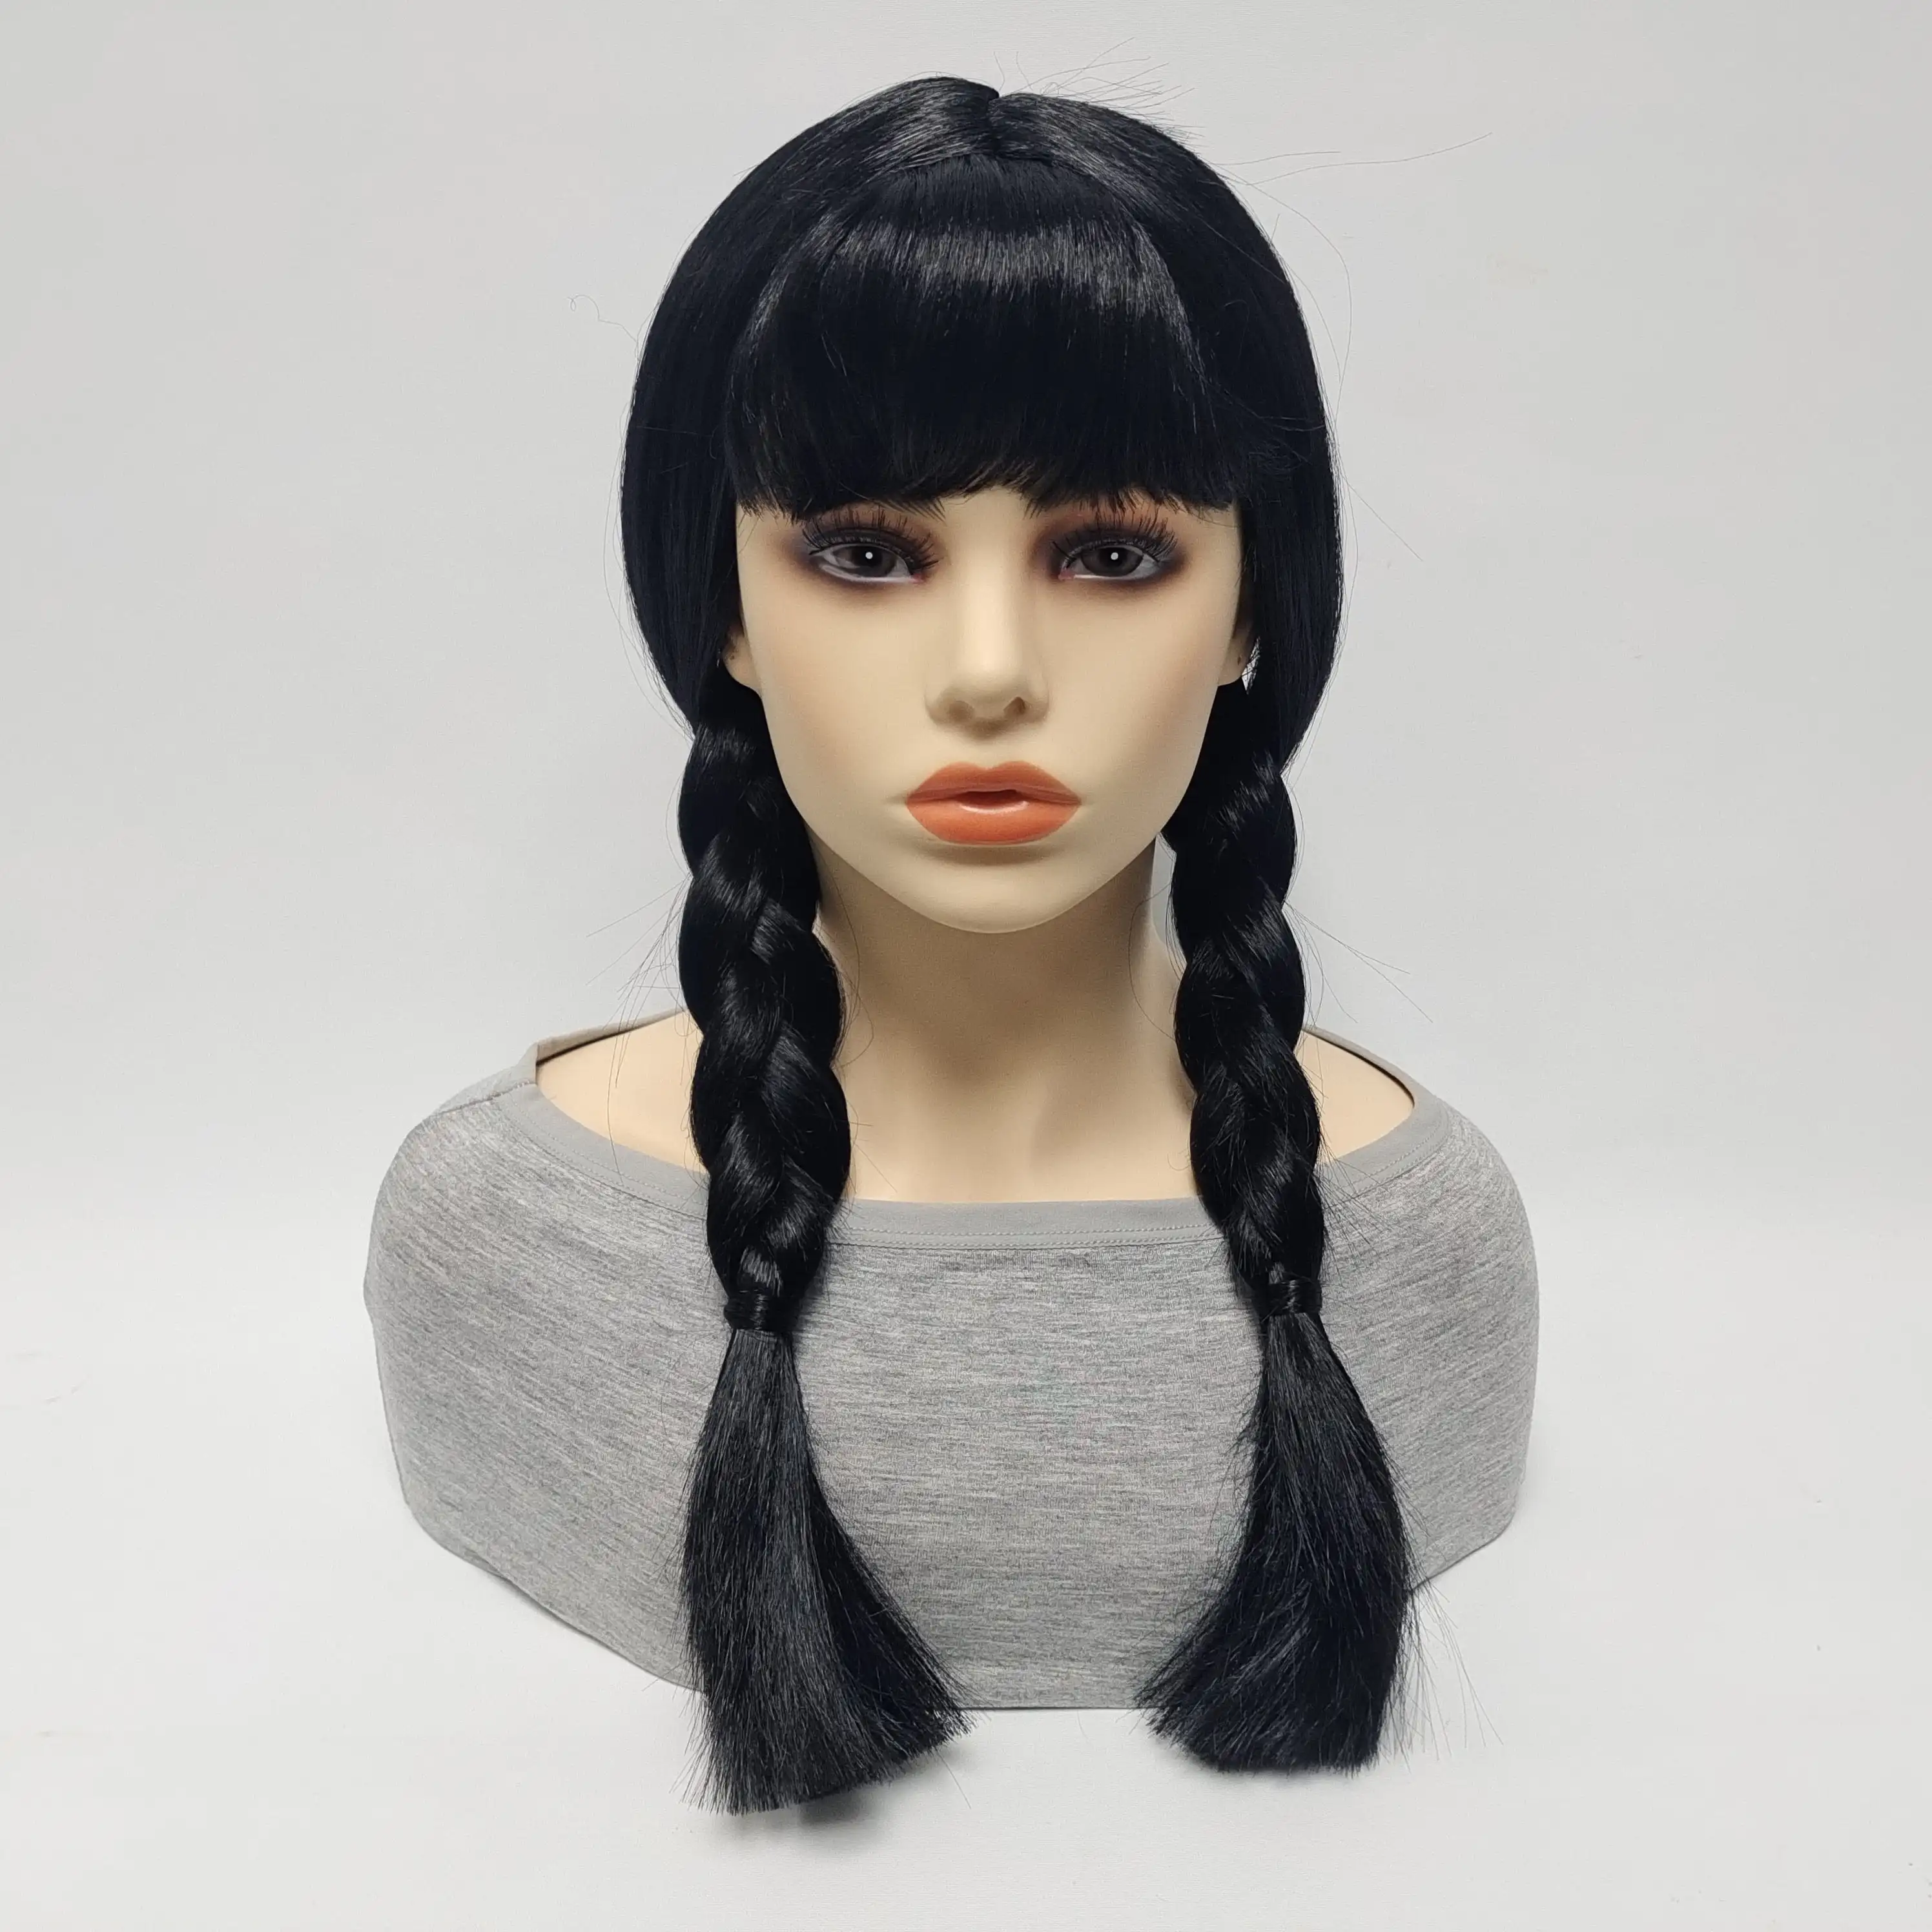 Wednesday Addams Wig For Women Cosplay Black Two Braids Fashion Synthetic Wig High Quality Free Shipping And Cheap Item Wigs wednesday раскраска